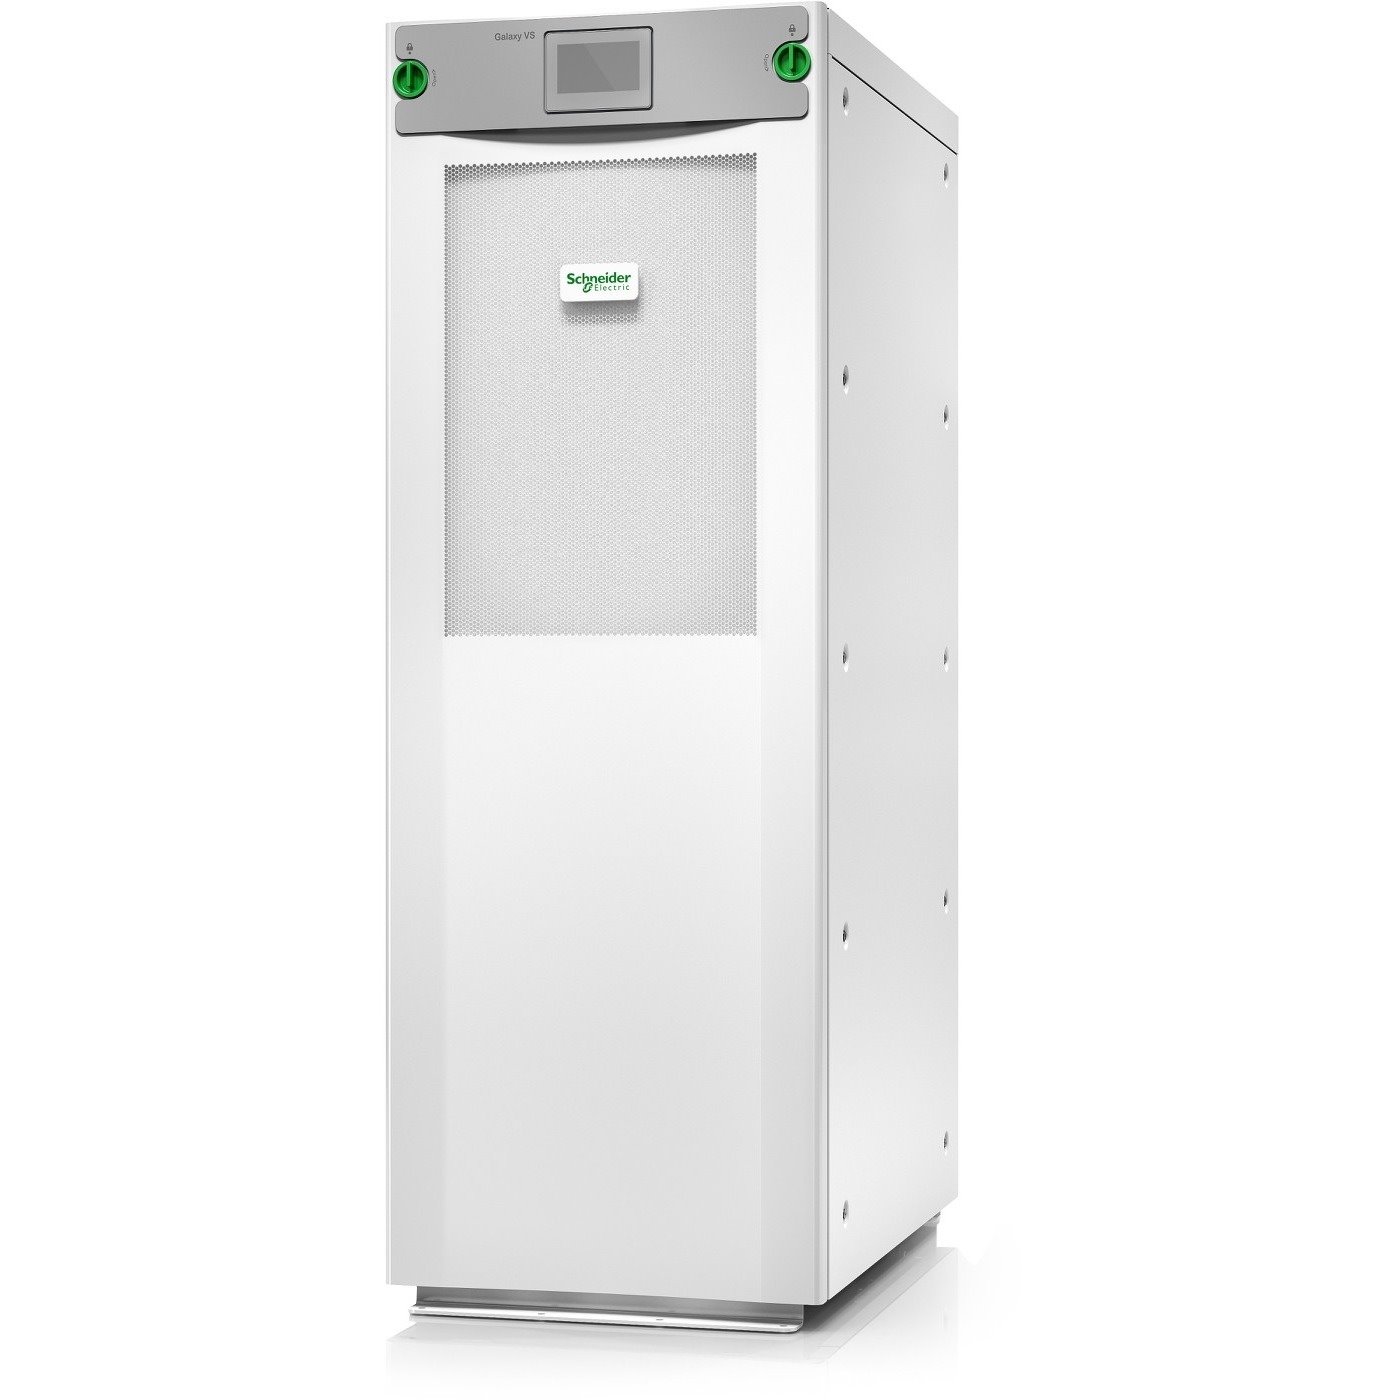 APC by Schneider Electric Galaxy VS Double Conversion Online UPS - 120 kVA - Three Phase